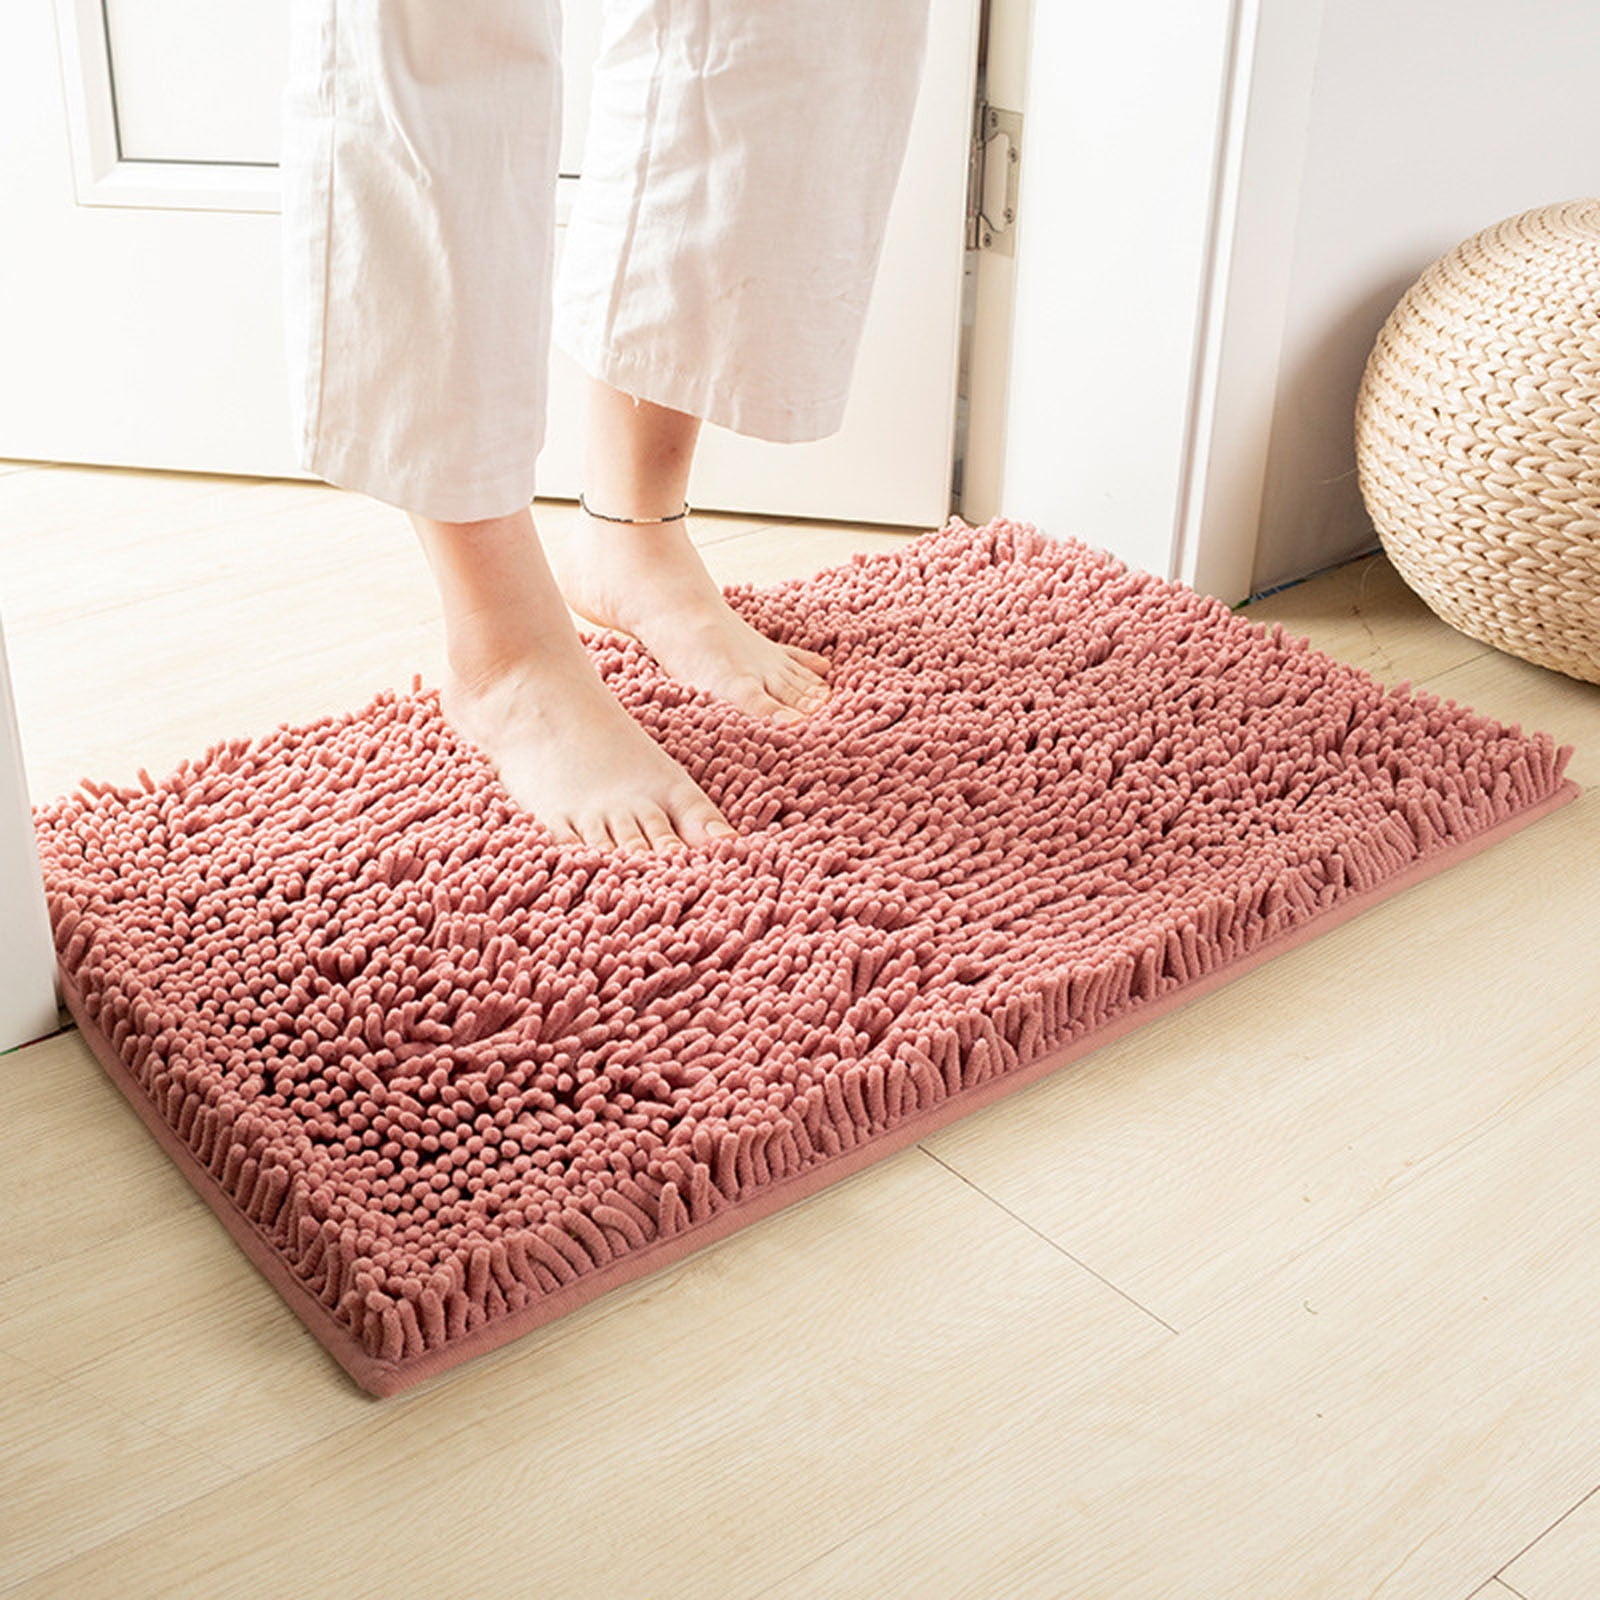 TUTUnaumb 2022 Winter Bathroom Rug,Soft And Comfortable,Puffy And Durable  Thick Bath Mat,Machine Washable Bathroom Mats,Non-Slip For Shower And Under